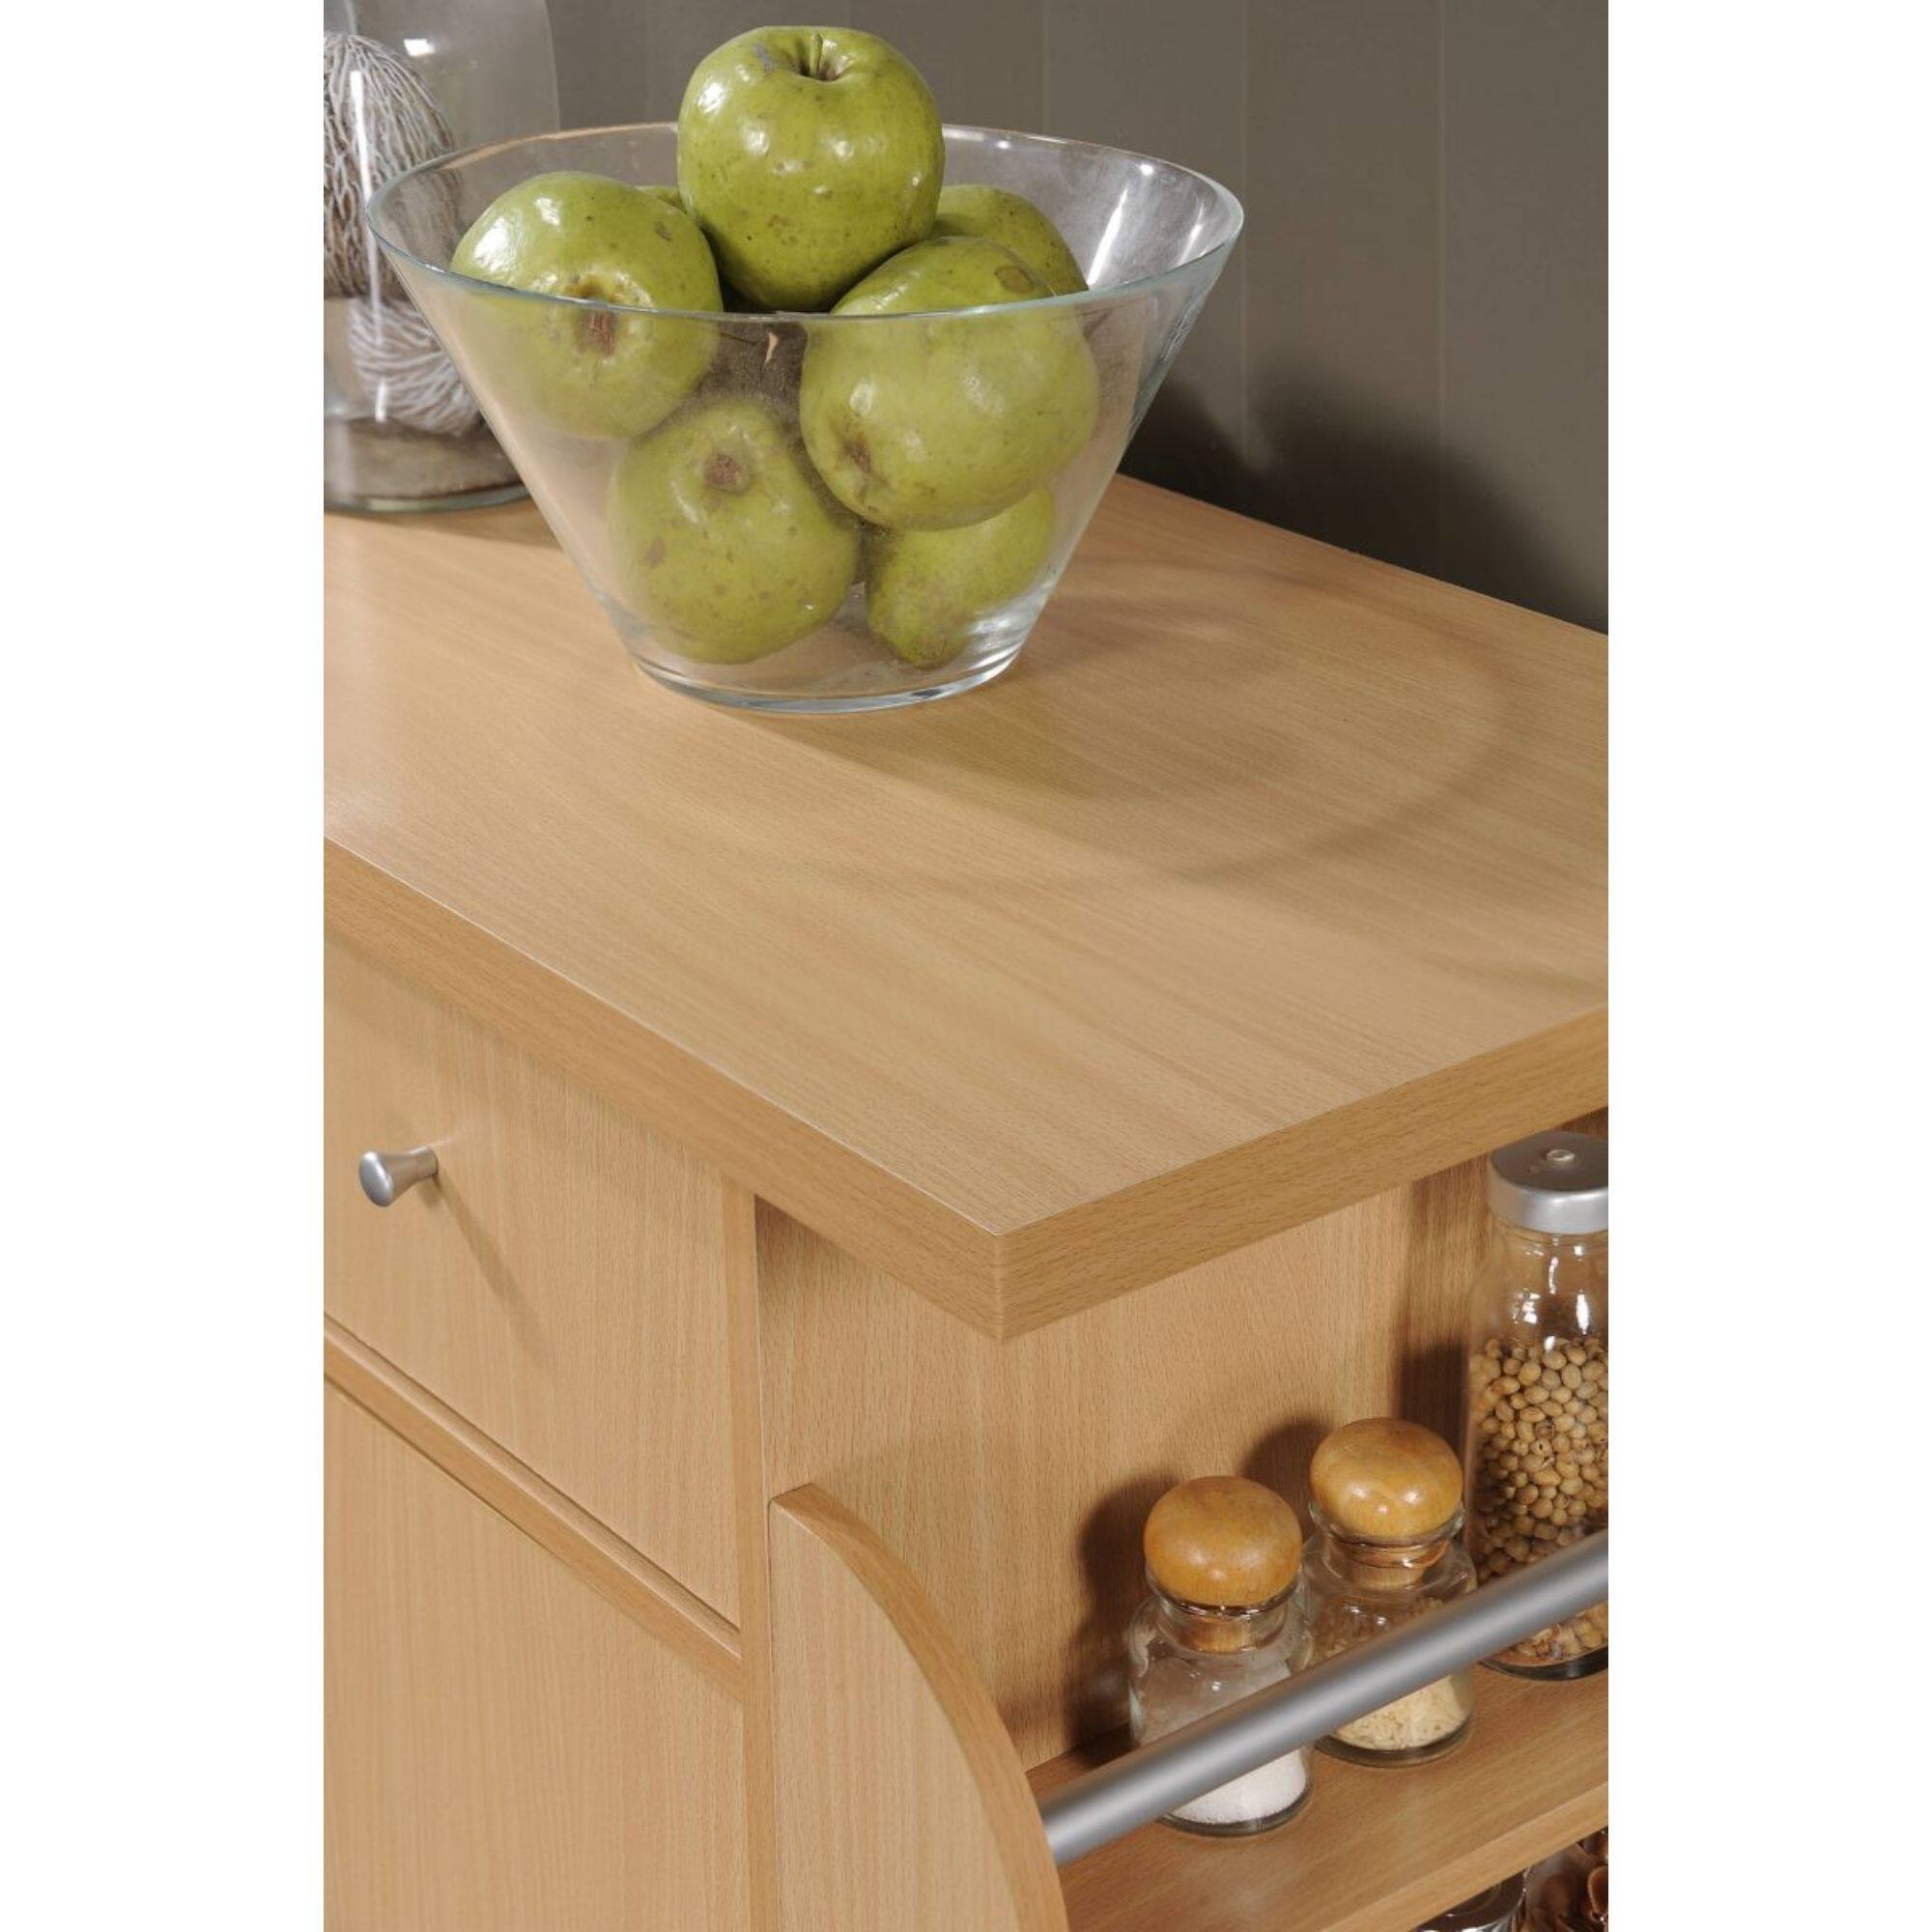 35.25" Beige Multi Functional Kitchen Cart with Spice Rack